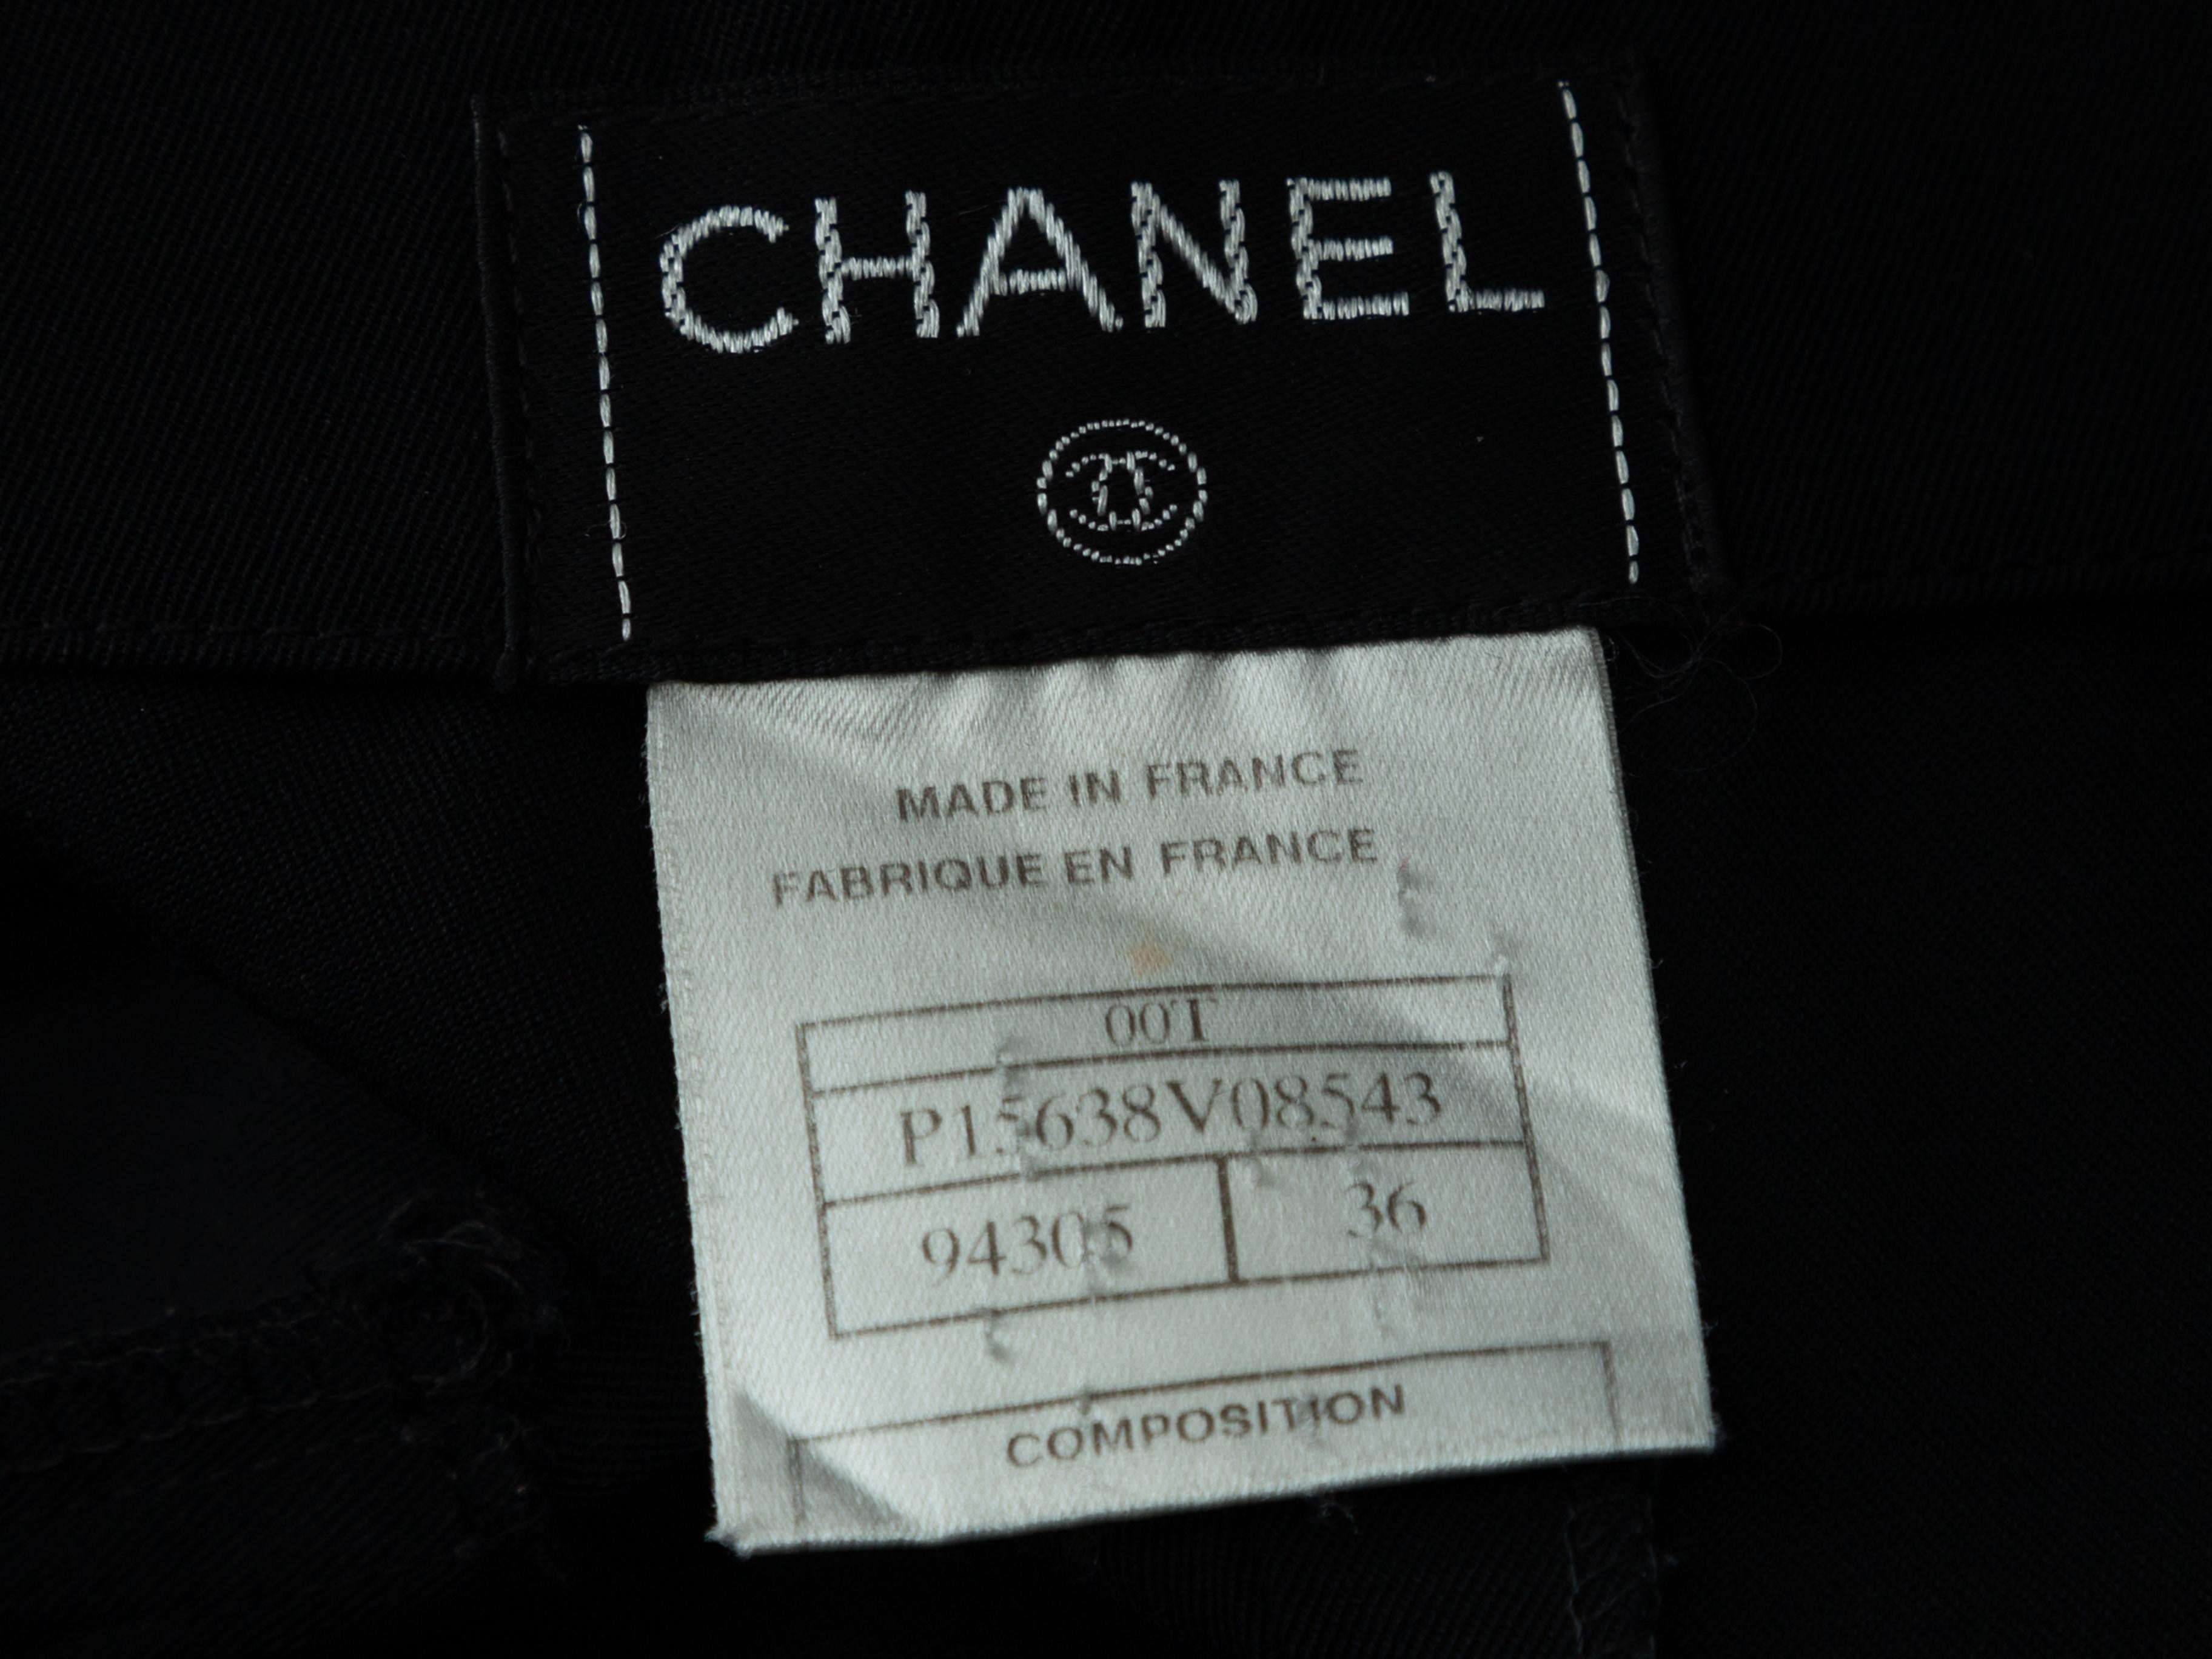 Product details: Black wool straight-leg pants by Chanel. Zip closure at side. Designer size 36. 25